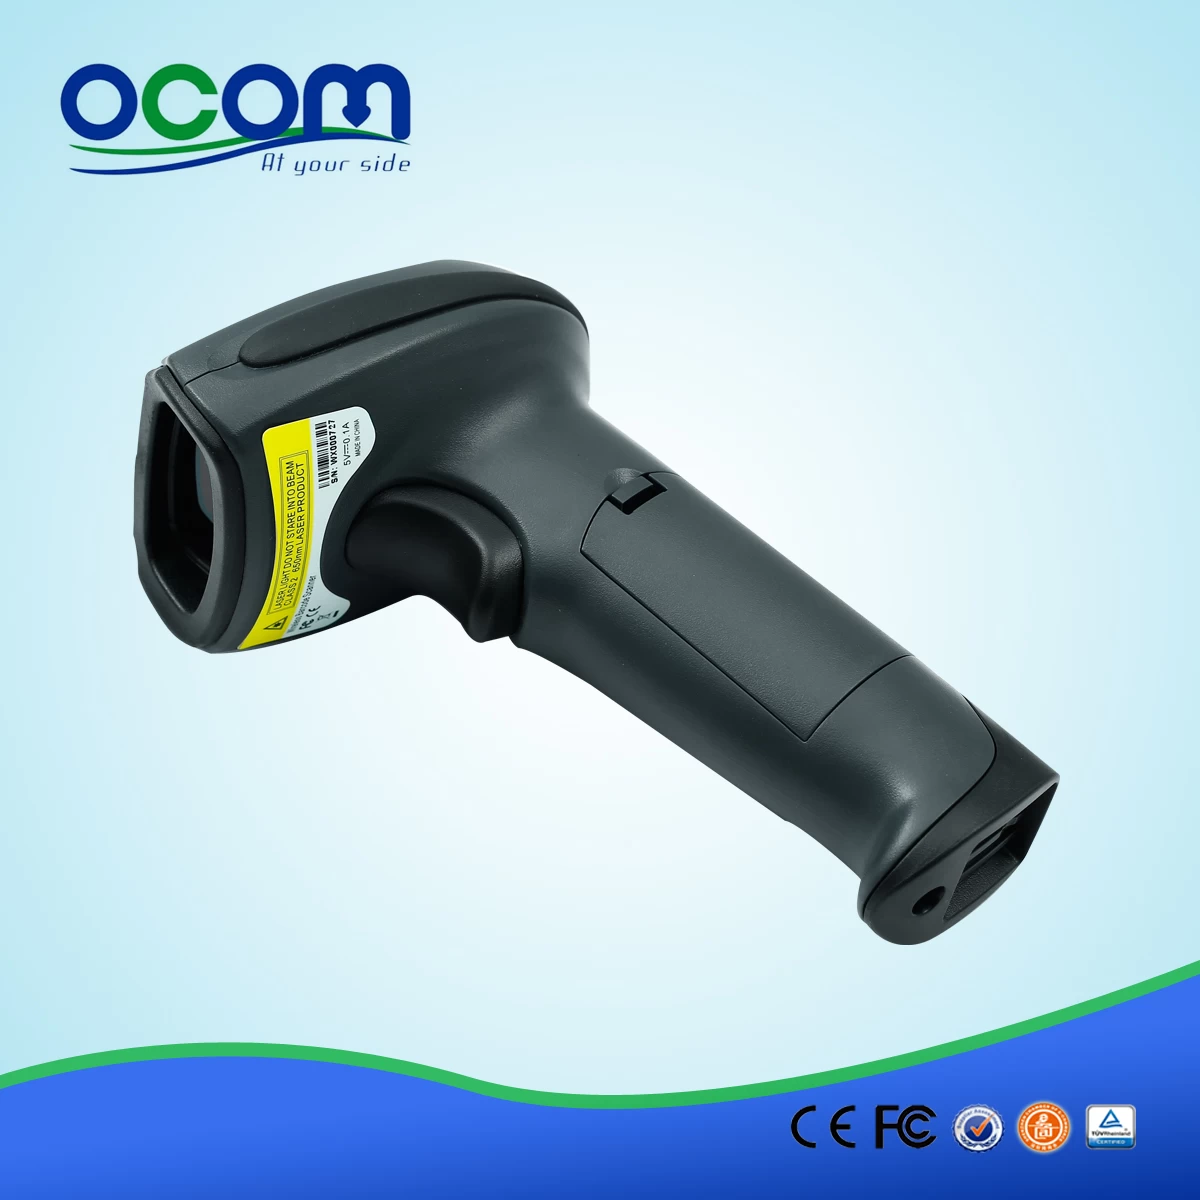 Android Compatible Wireless Barcode Scanner for 1D Codes